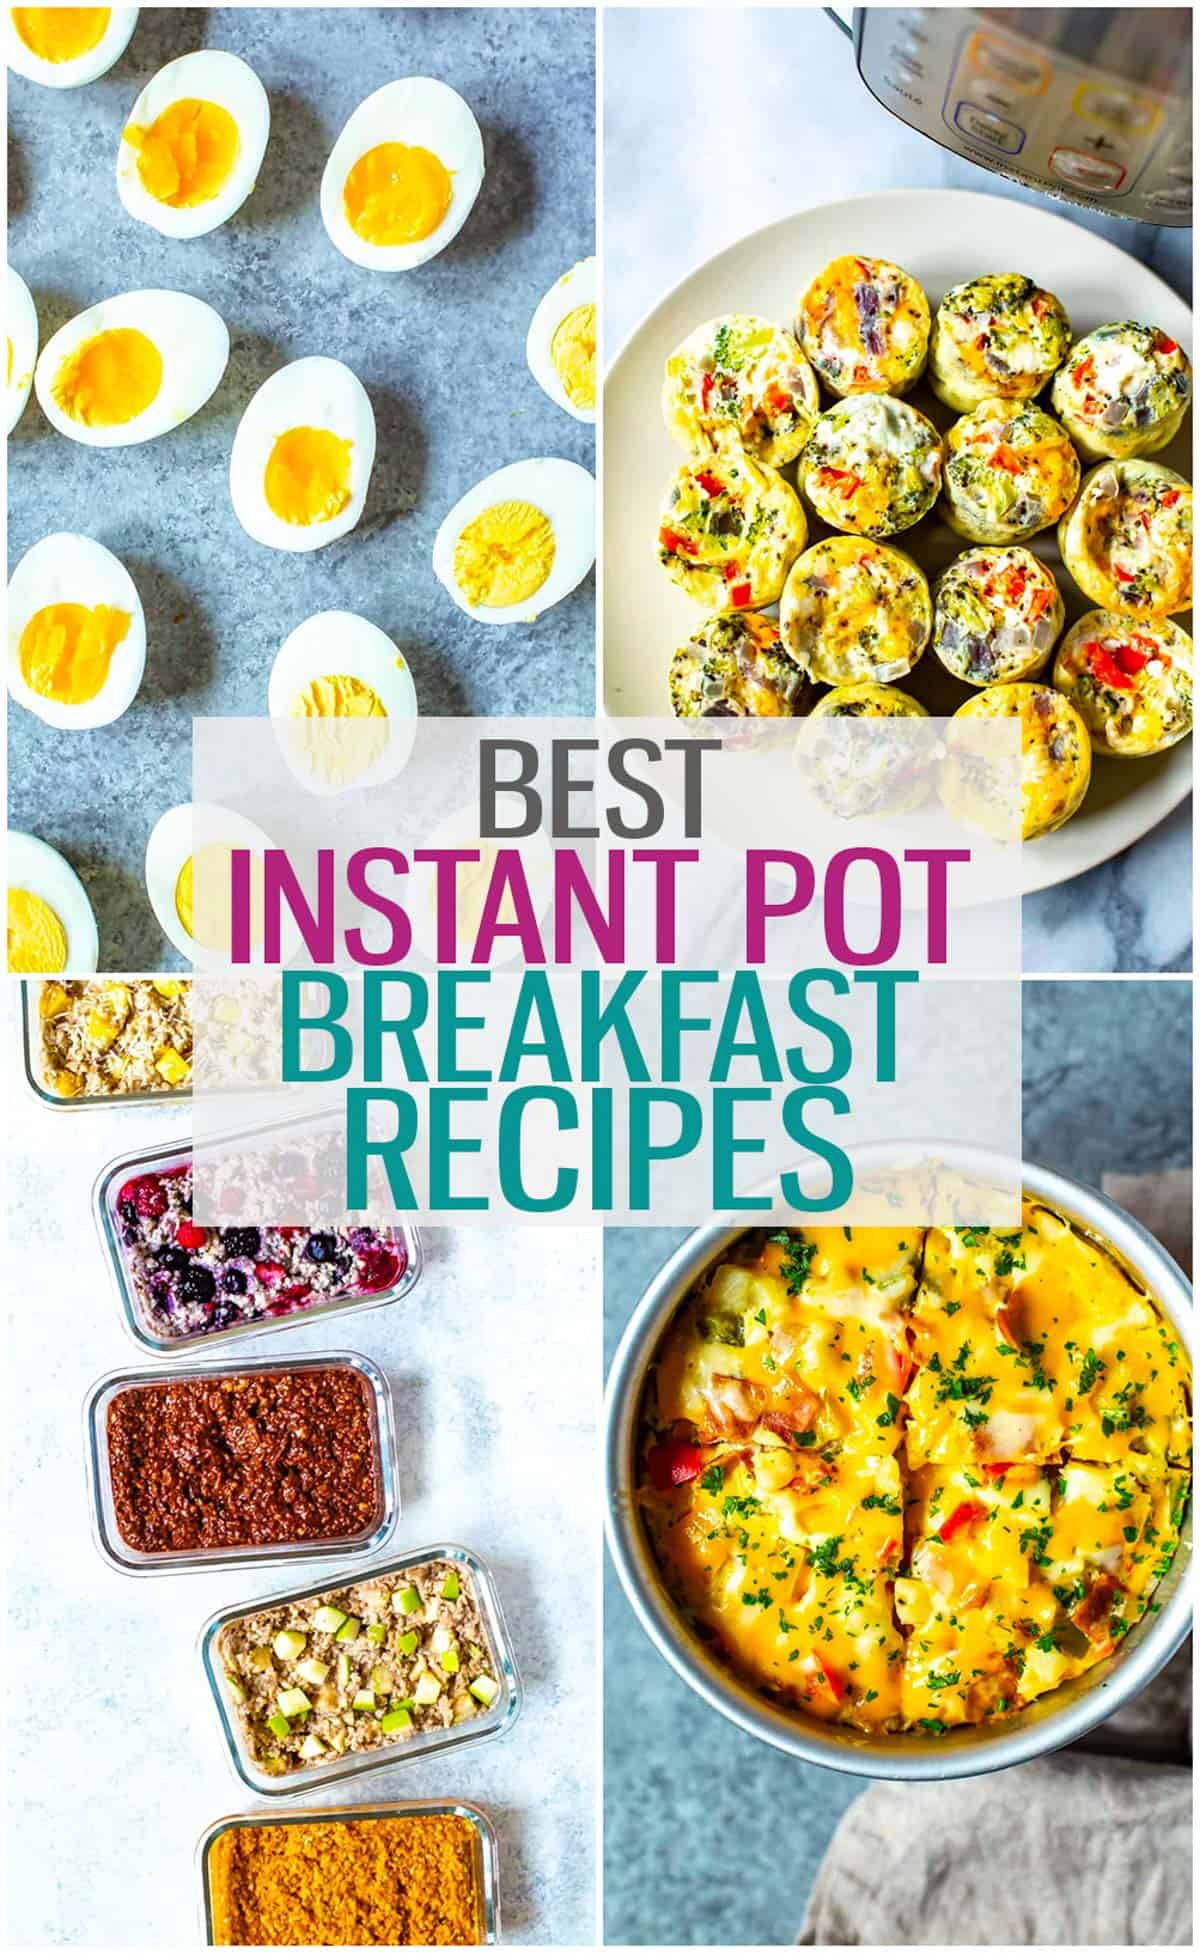 Meal Prep Baked Eggs 5 Ways - The Girl on Bloor